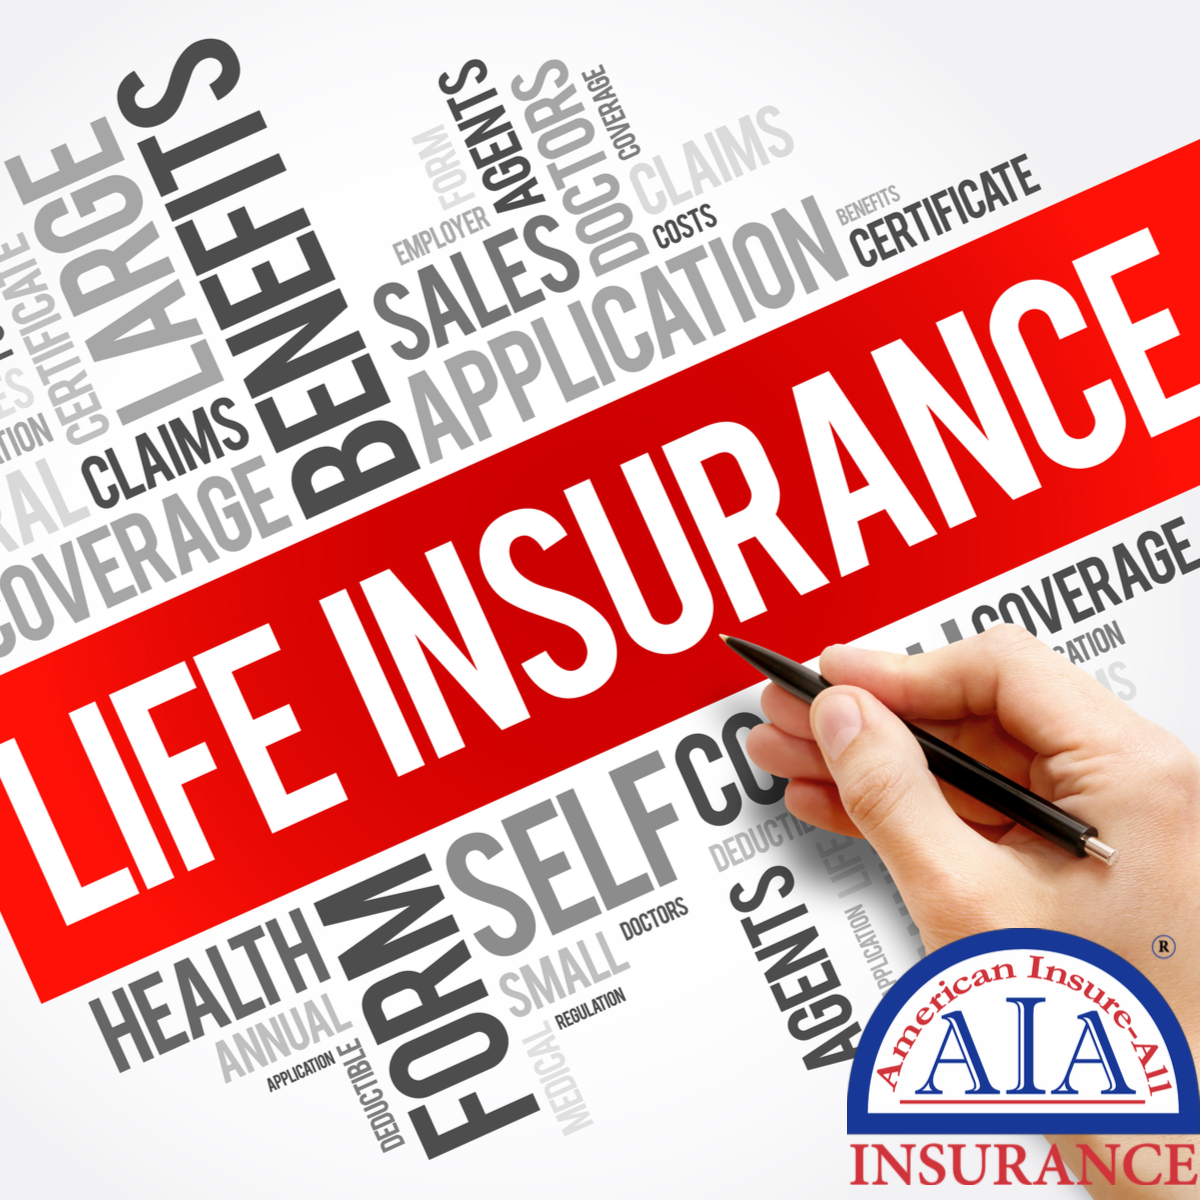 Check Out Term Life Insurance with American Insure-All® in Seattle